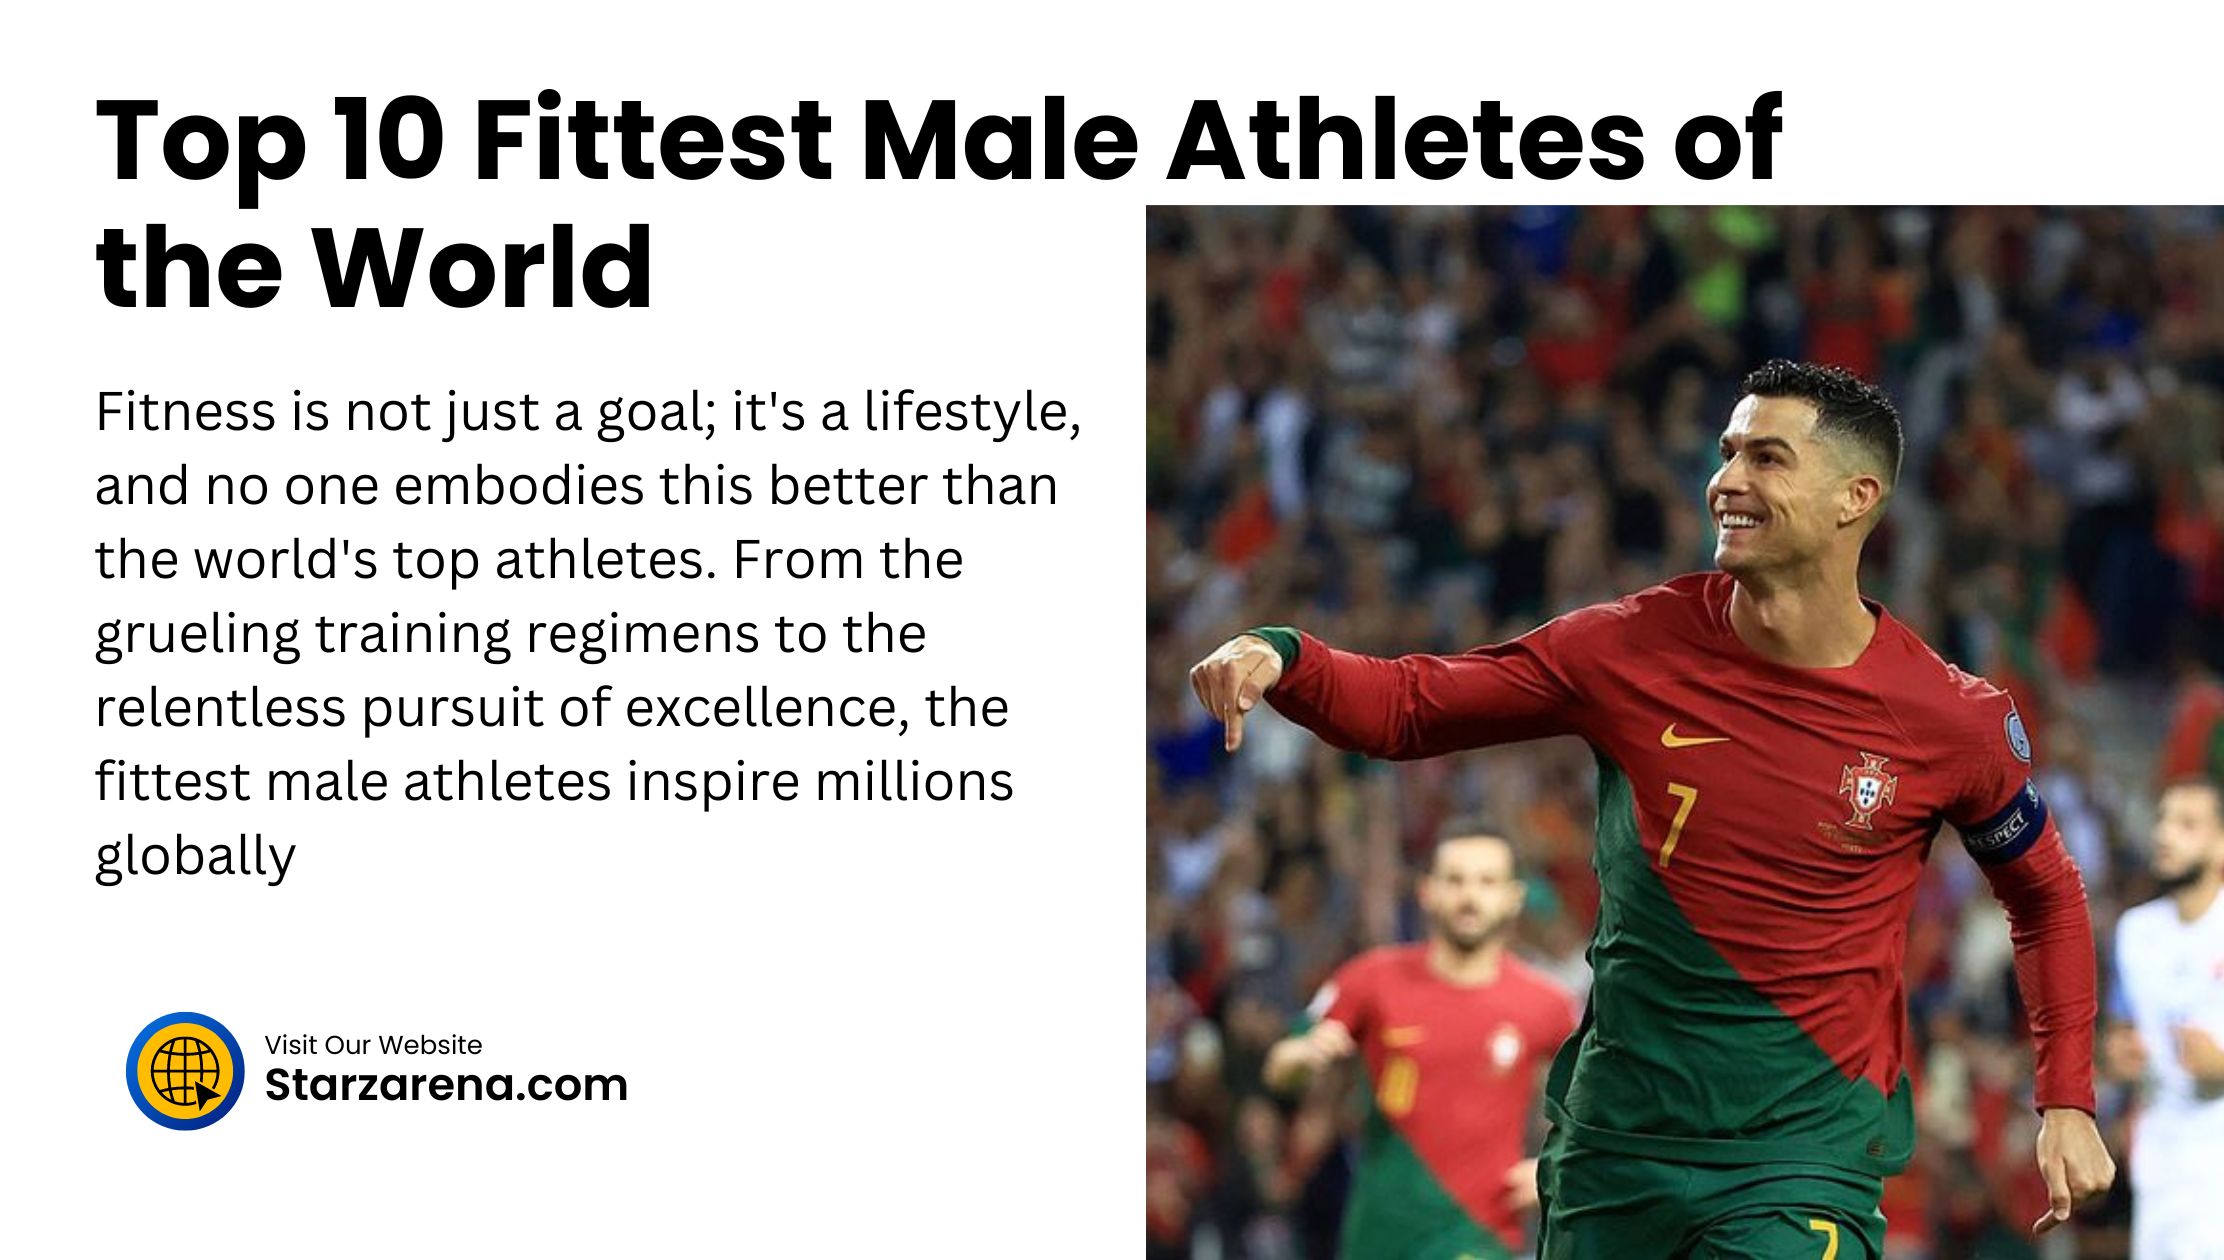 Top 10 Fittest Male Athletes of the World